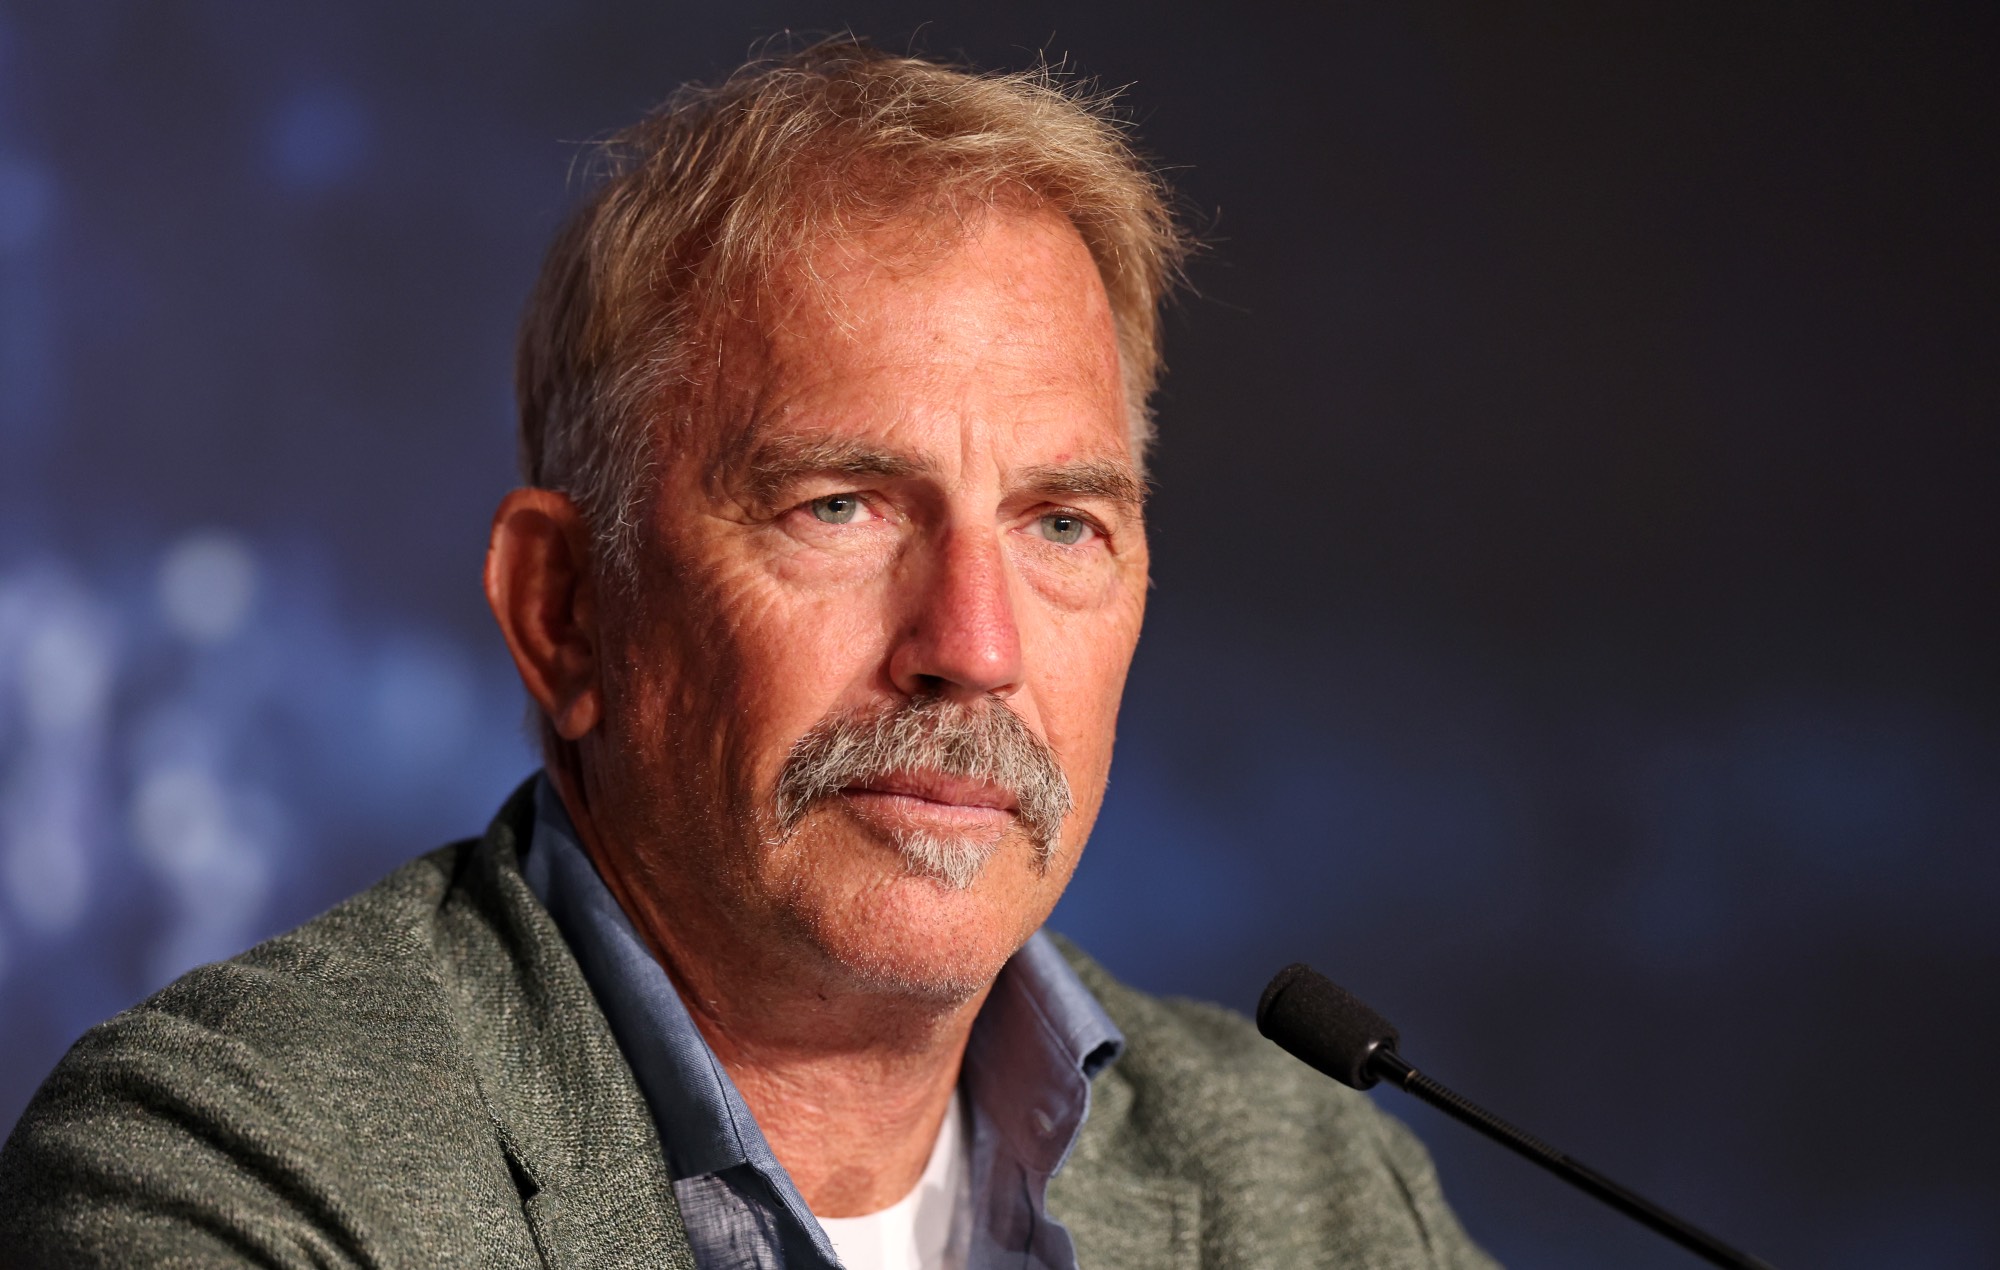 Kevin Costner hits back at “delicate” critics of his new film over Native American representation